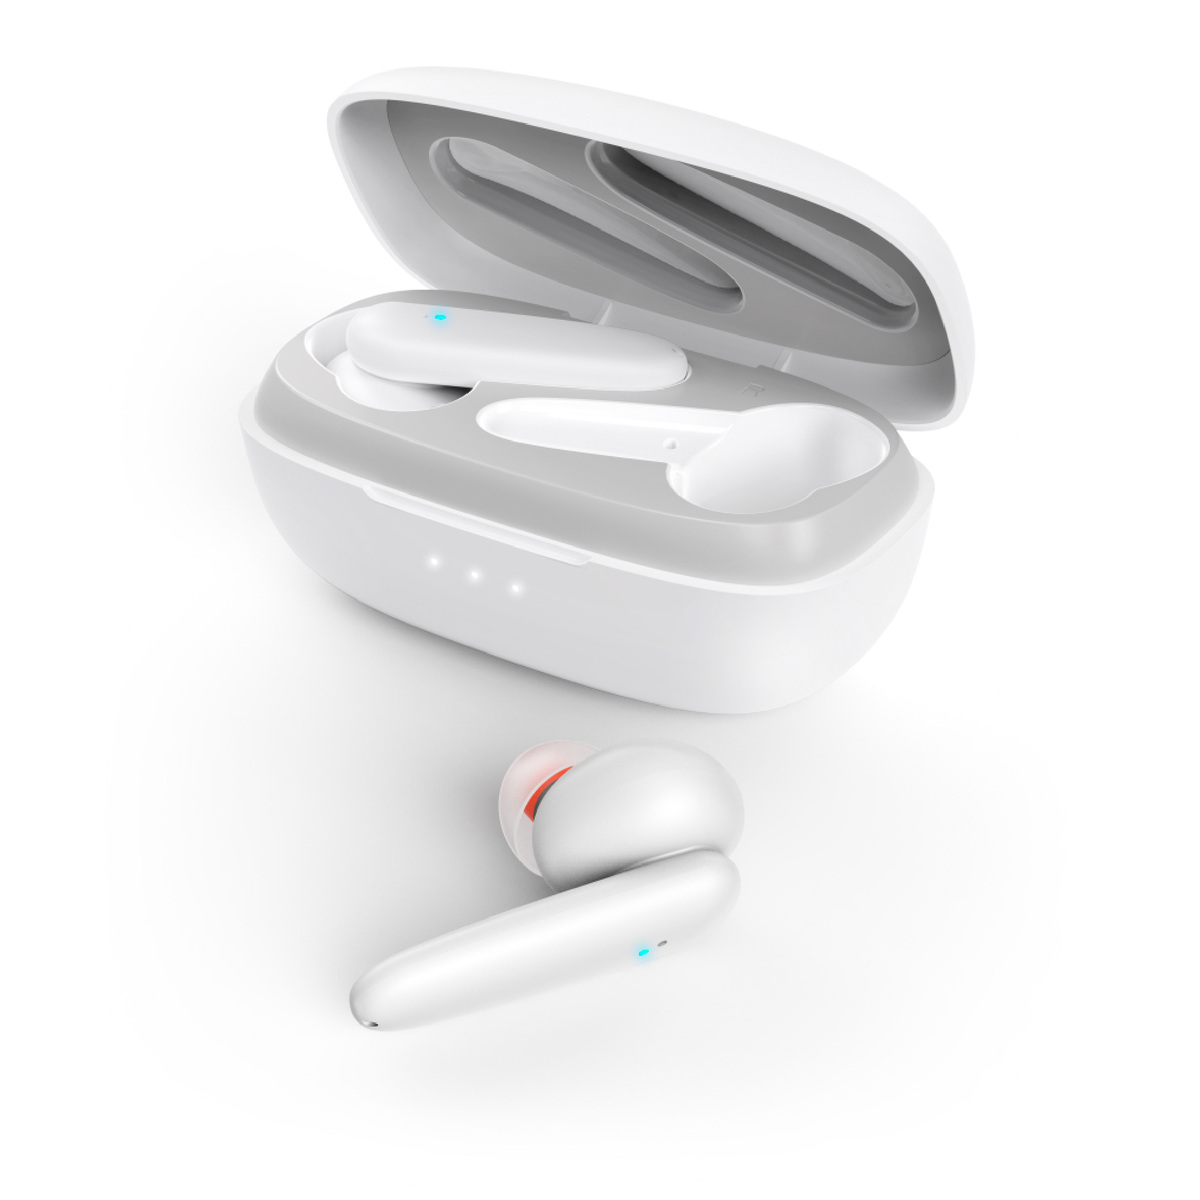 Hama Passion Clear True Wireless Bluetooth Headphones, ANC, In-ear, White, 184079